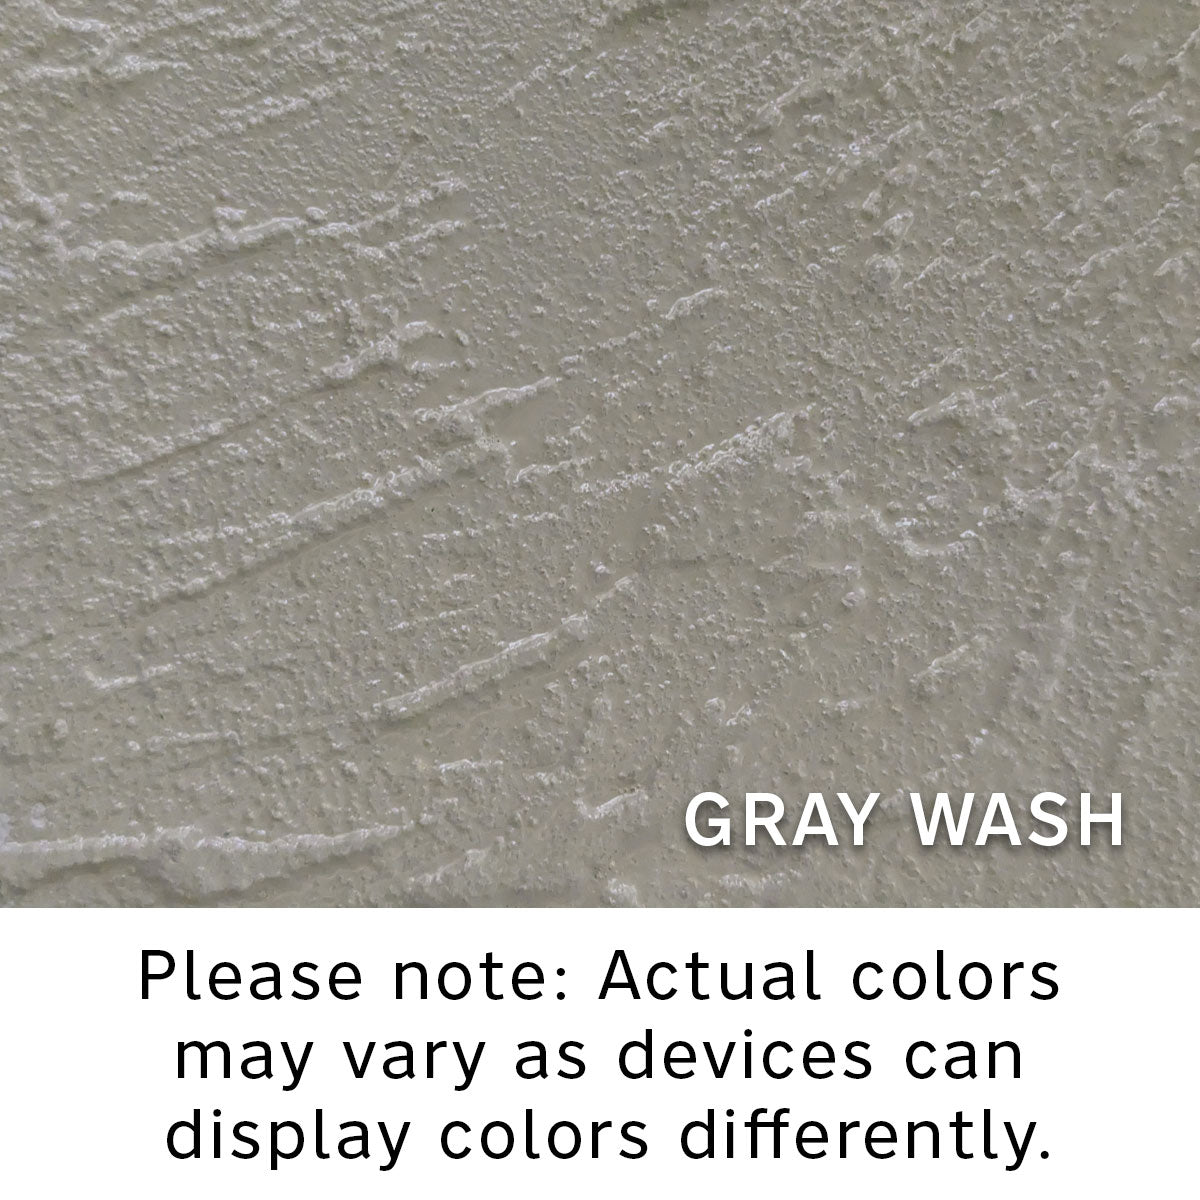 Swatch for Gray Wash color